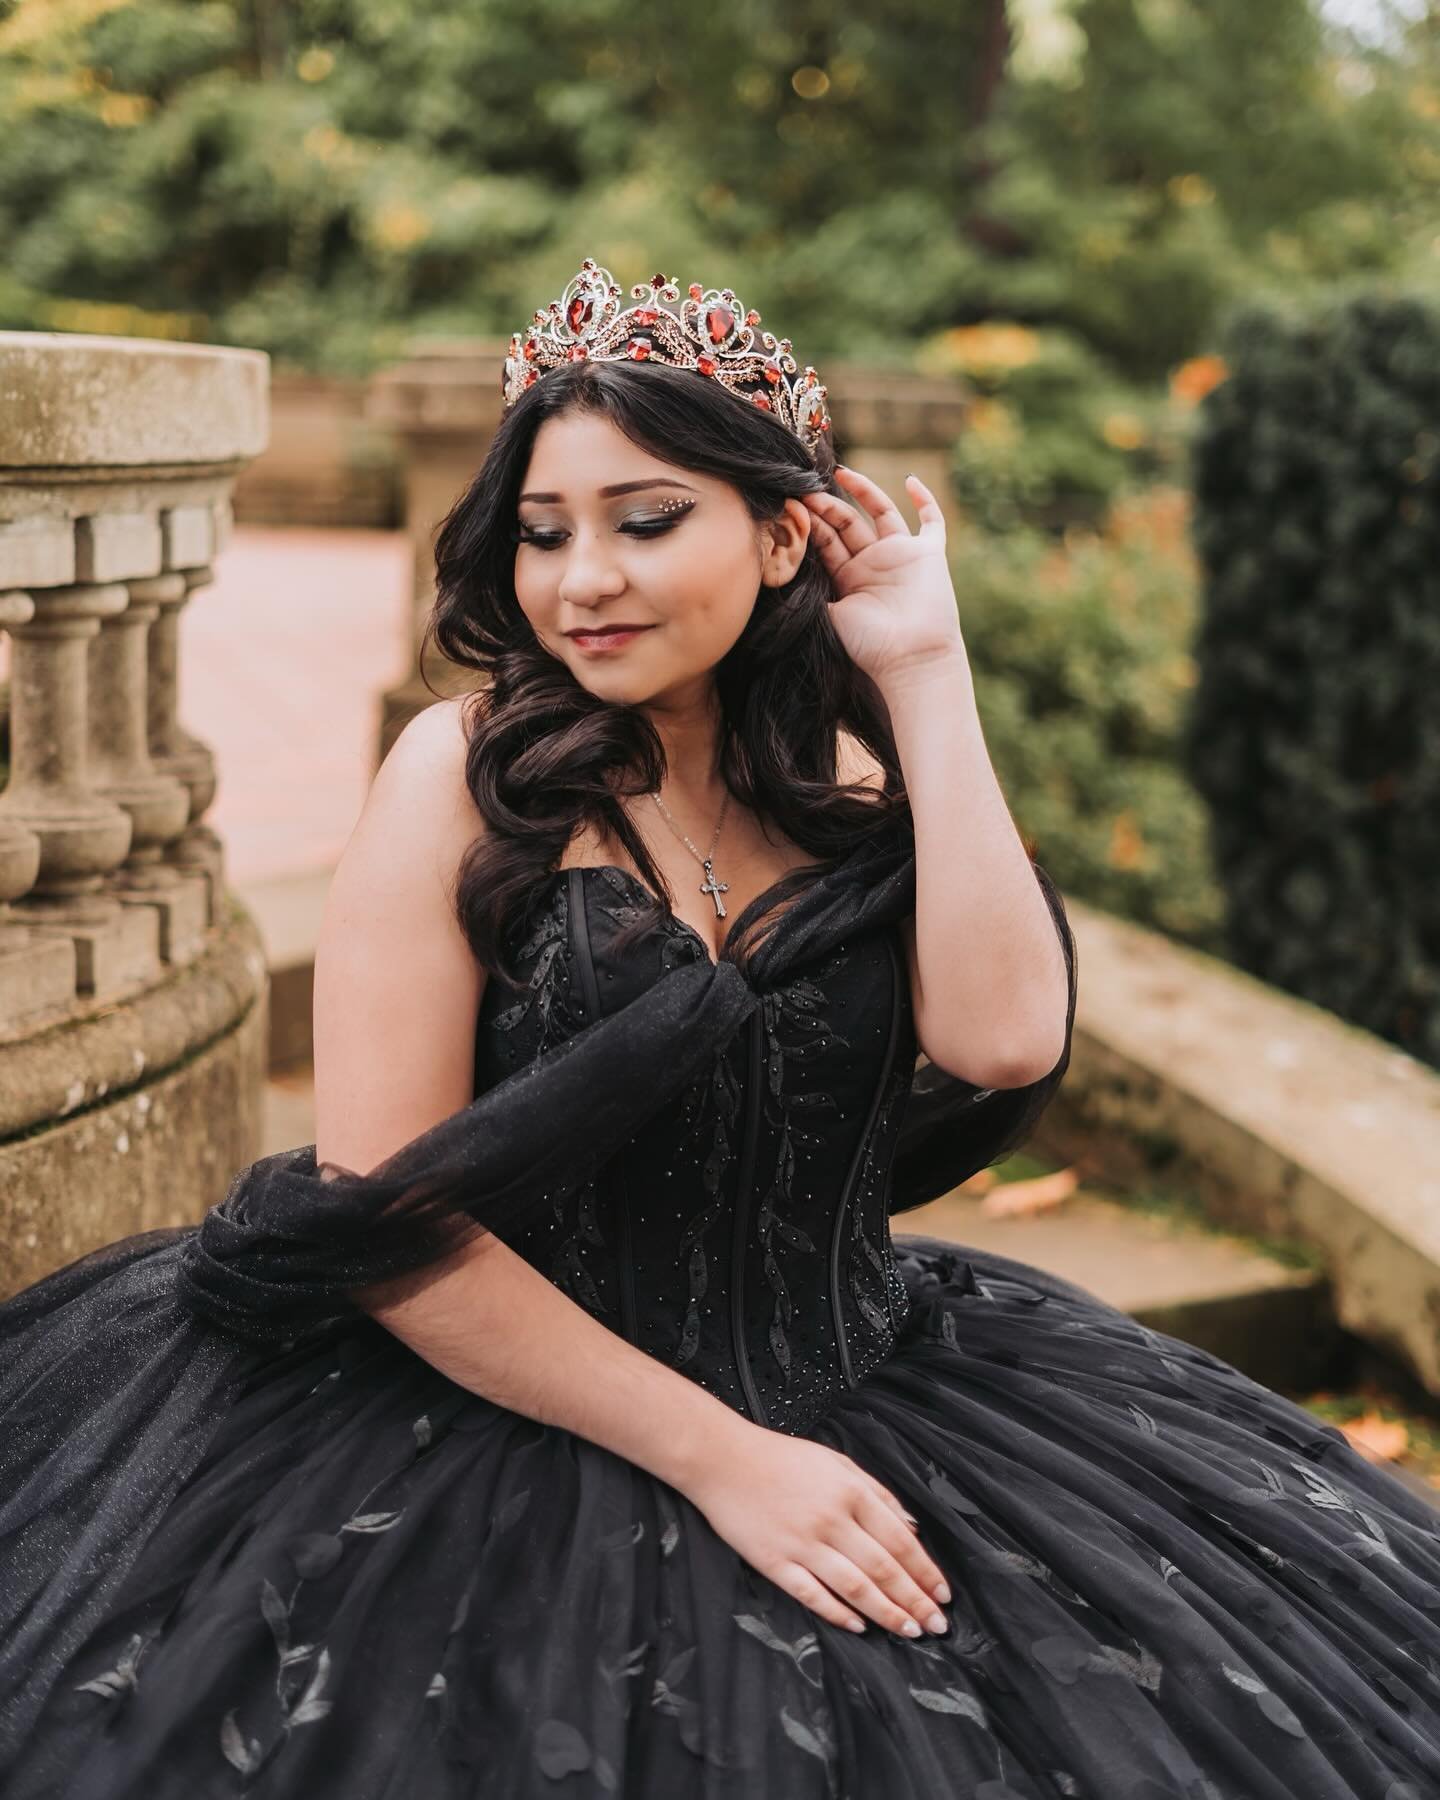 Black is timeless &amp; classy 🖤✨ 
Thank you BRISEIDA for saying YES to the dress at @luciaisabelcollection 
.
@golden_bliss_photography 
@favisfabulouscakes 
@arteandbeautypdx 
.
#quince #quinceanera #15a&ntilde;os #15 #queen #elegant #classy #sayy